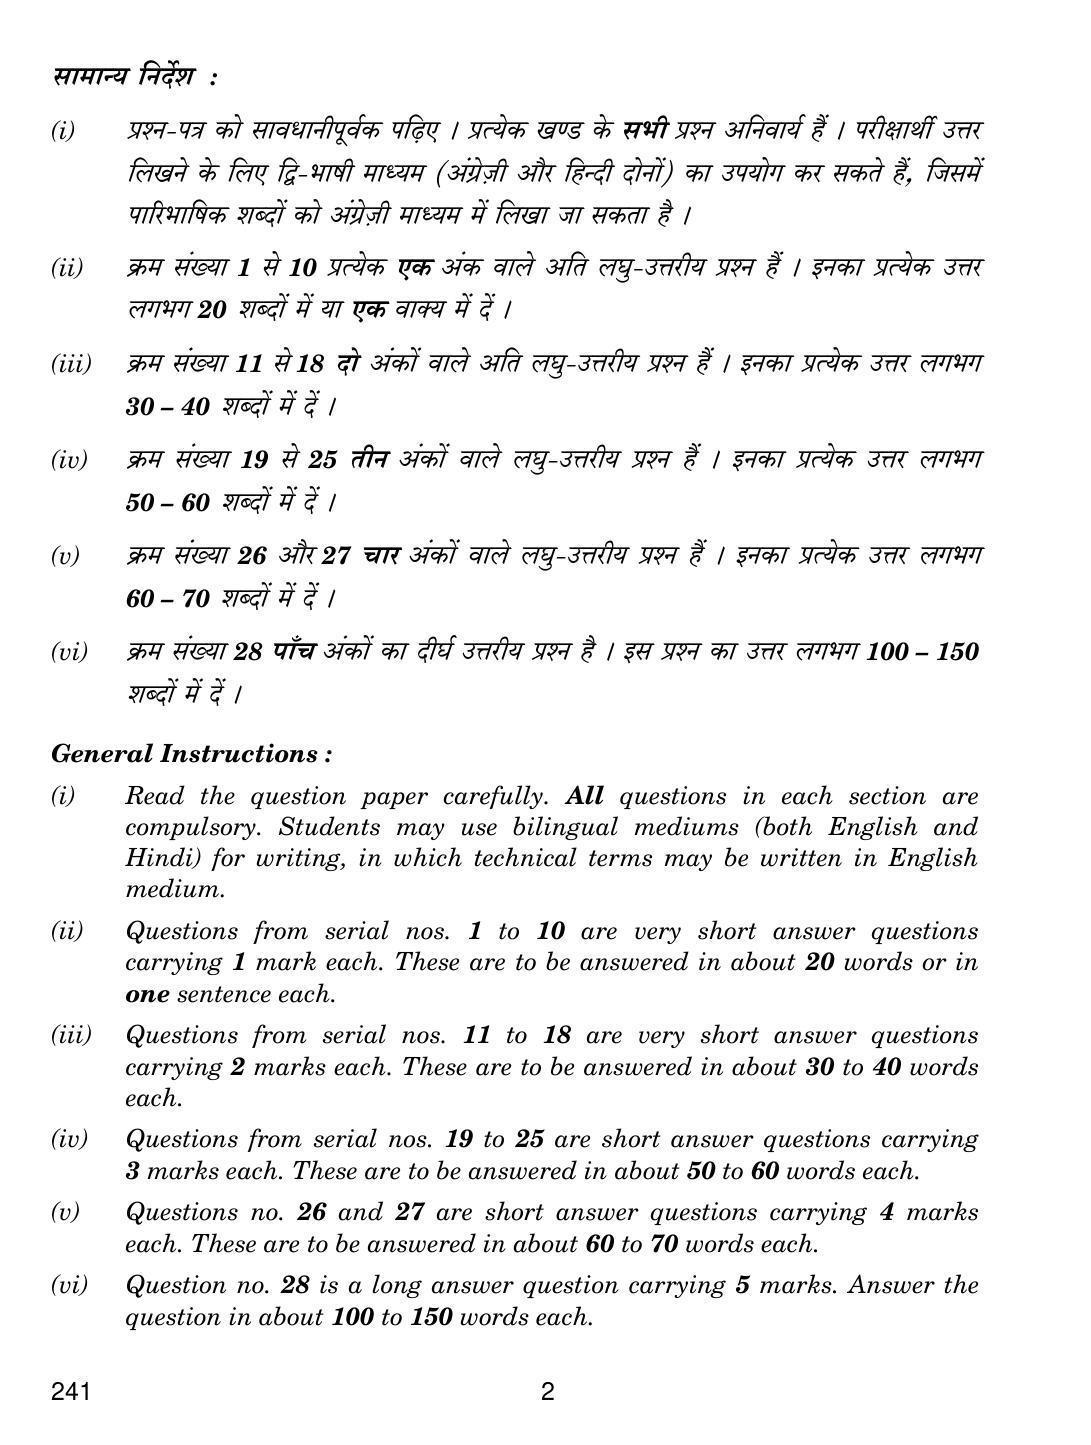 CBSE Class 12 241 FOOD PRODUCTION III 2018 Question Paper - Page 2